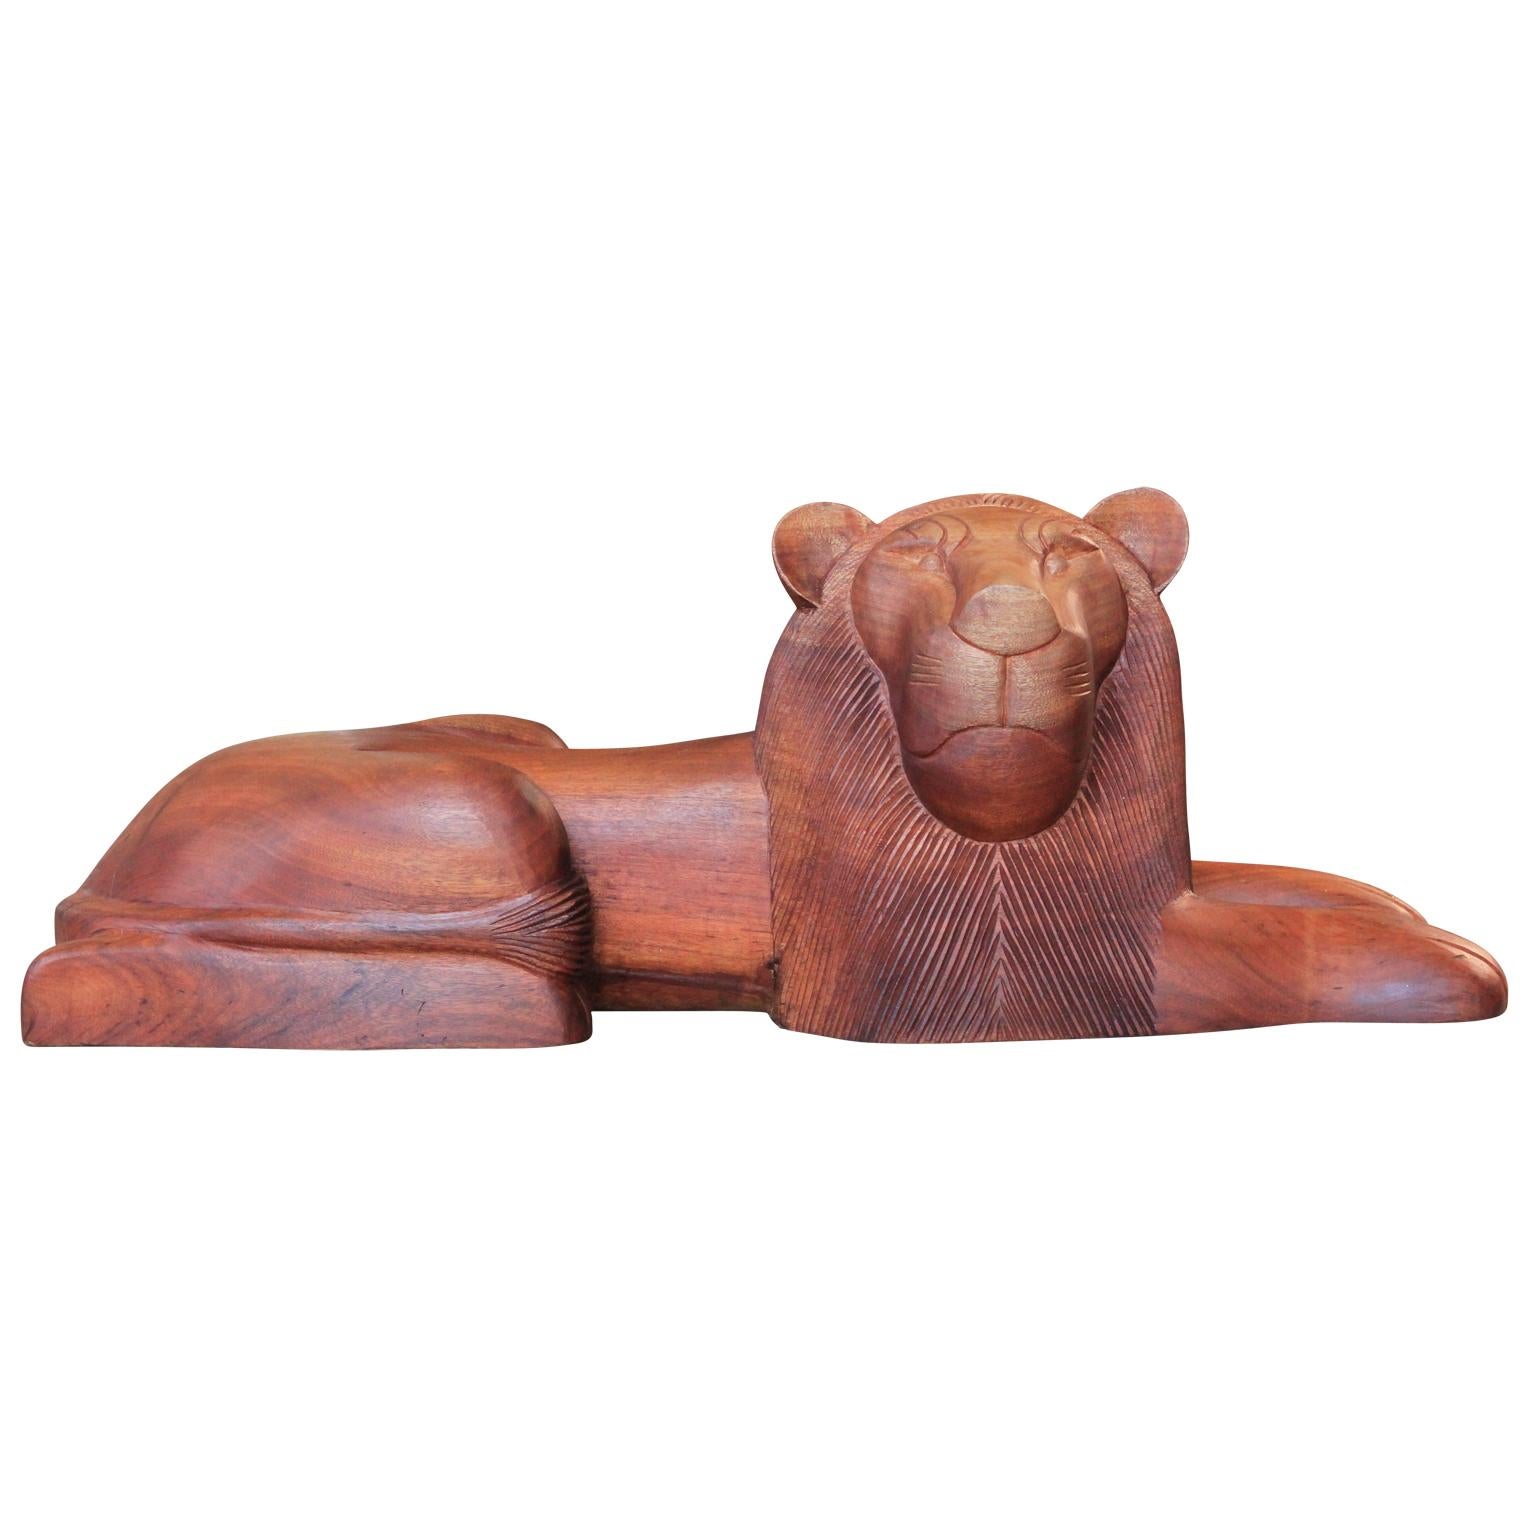 Pair of stylized mid century modern solid teak lion sculptures in the style of the work of Sergio Bustamante. The pieces feature a smooth, polished finish with intricately carved facial details. Signed 